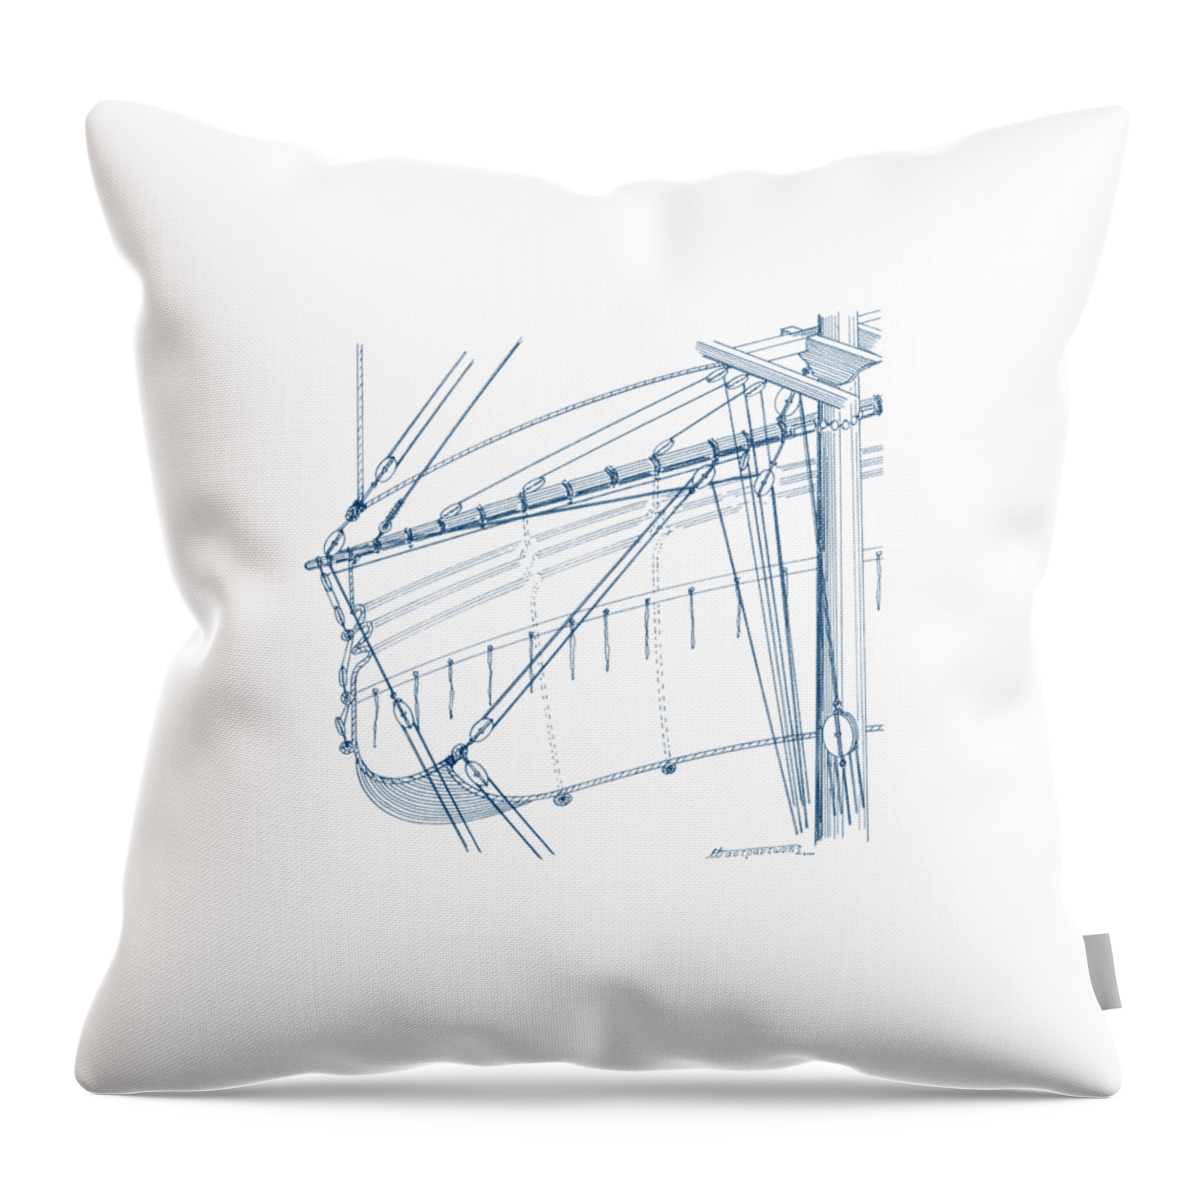 Sailing Vessels Throw Pillow featuring the drawing Top-mast yard and sail by Panagiotis Mastrantonis